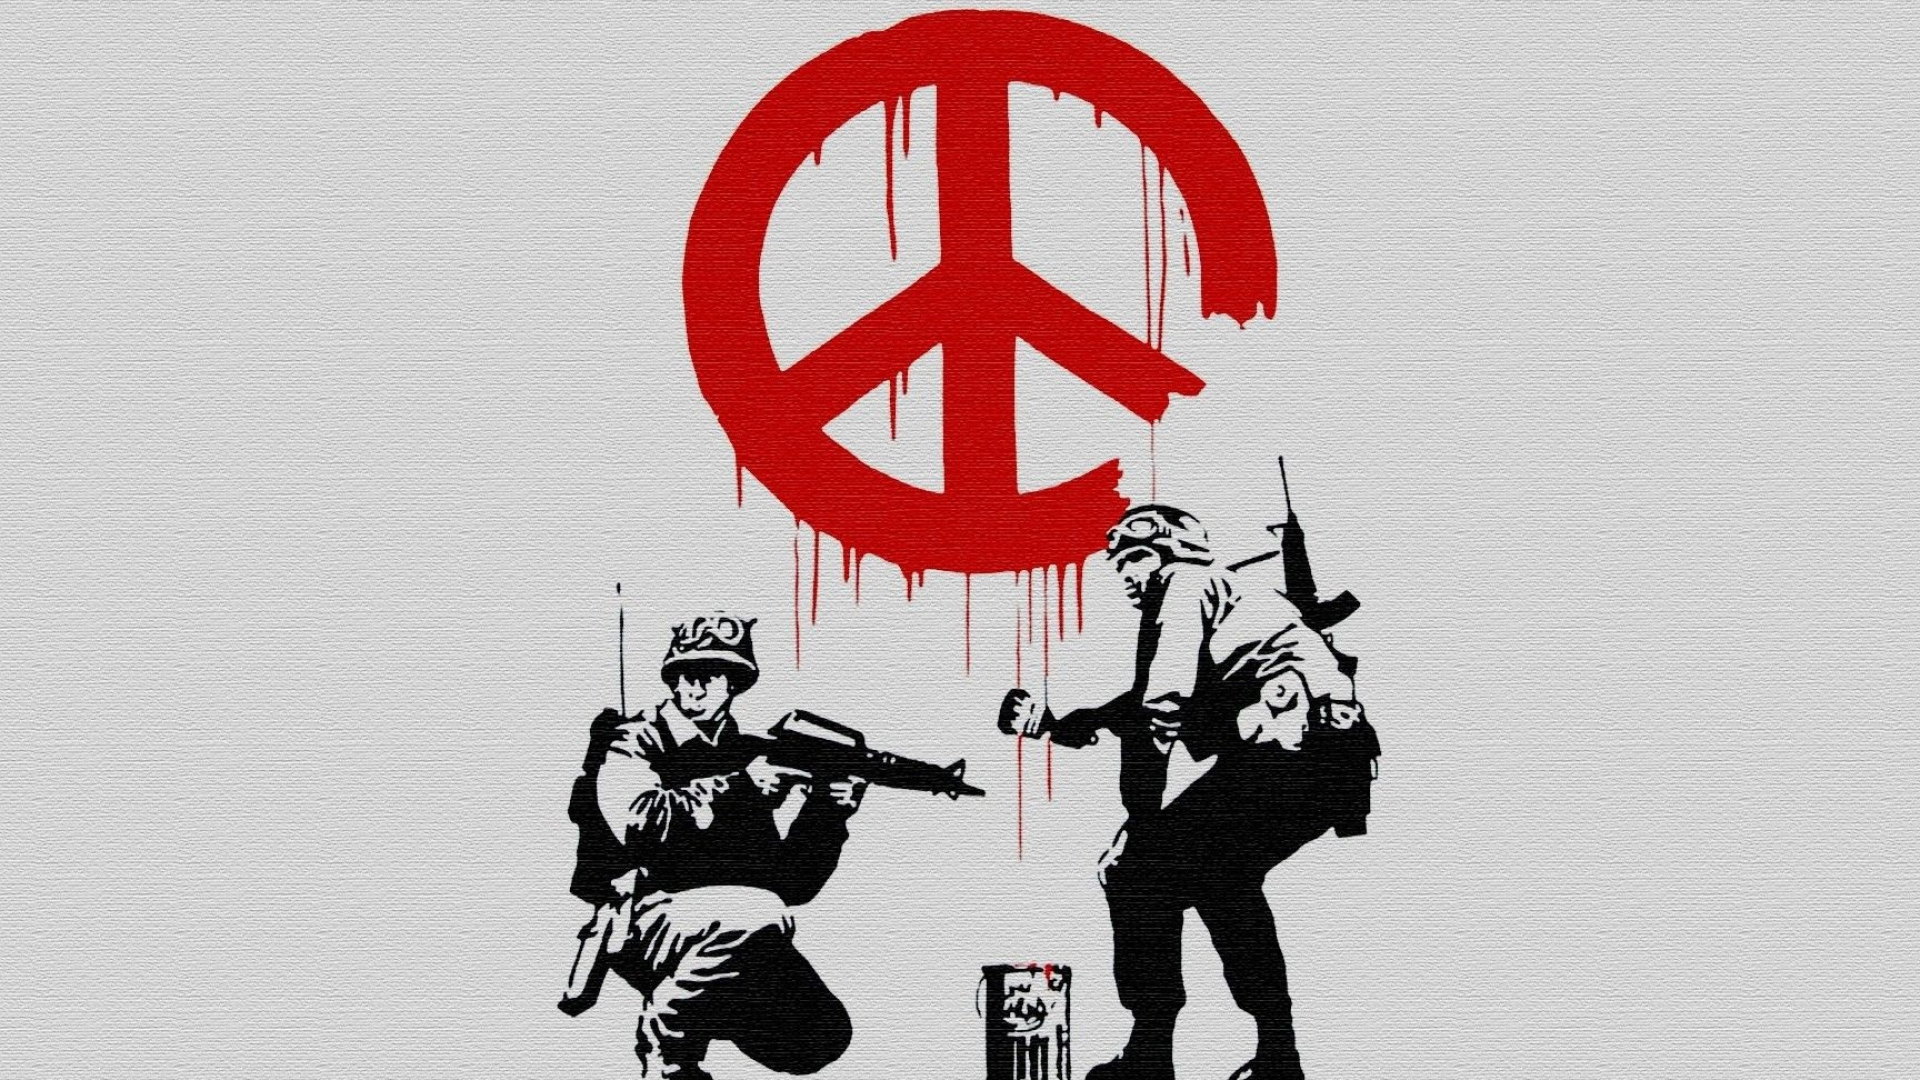 No war, Newest Banksy art, Thought-provoking, Social commentary, 1920x1080 Full HD Desktop